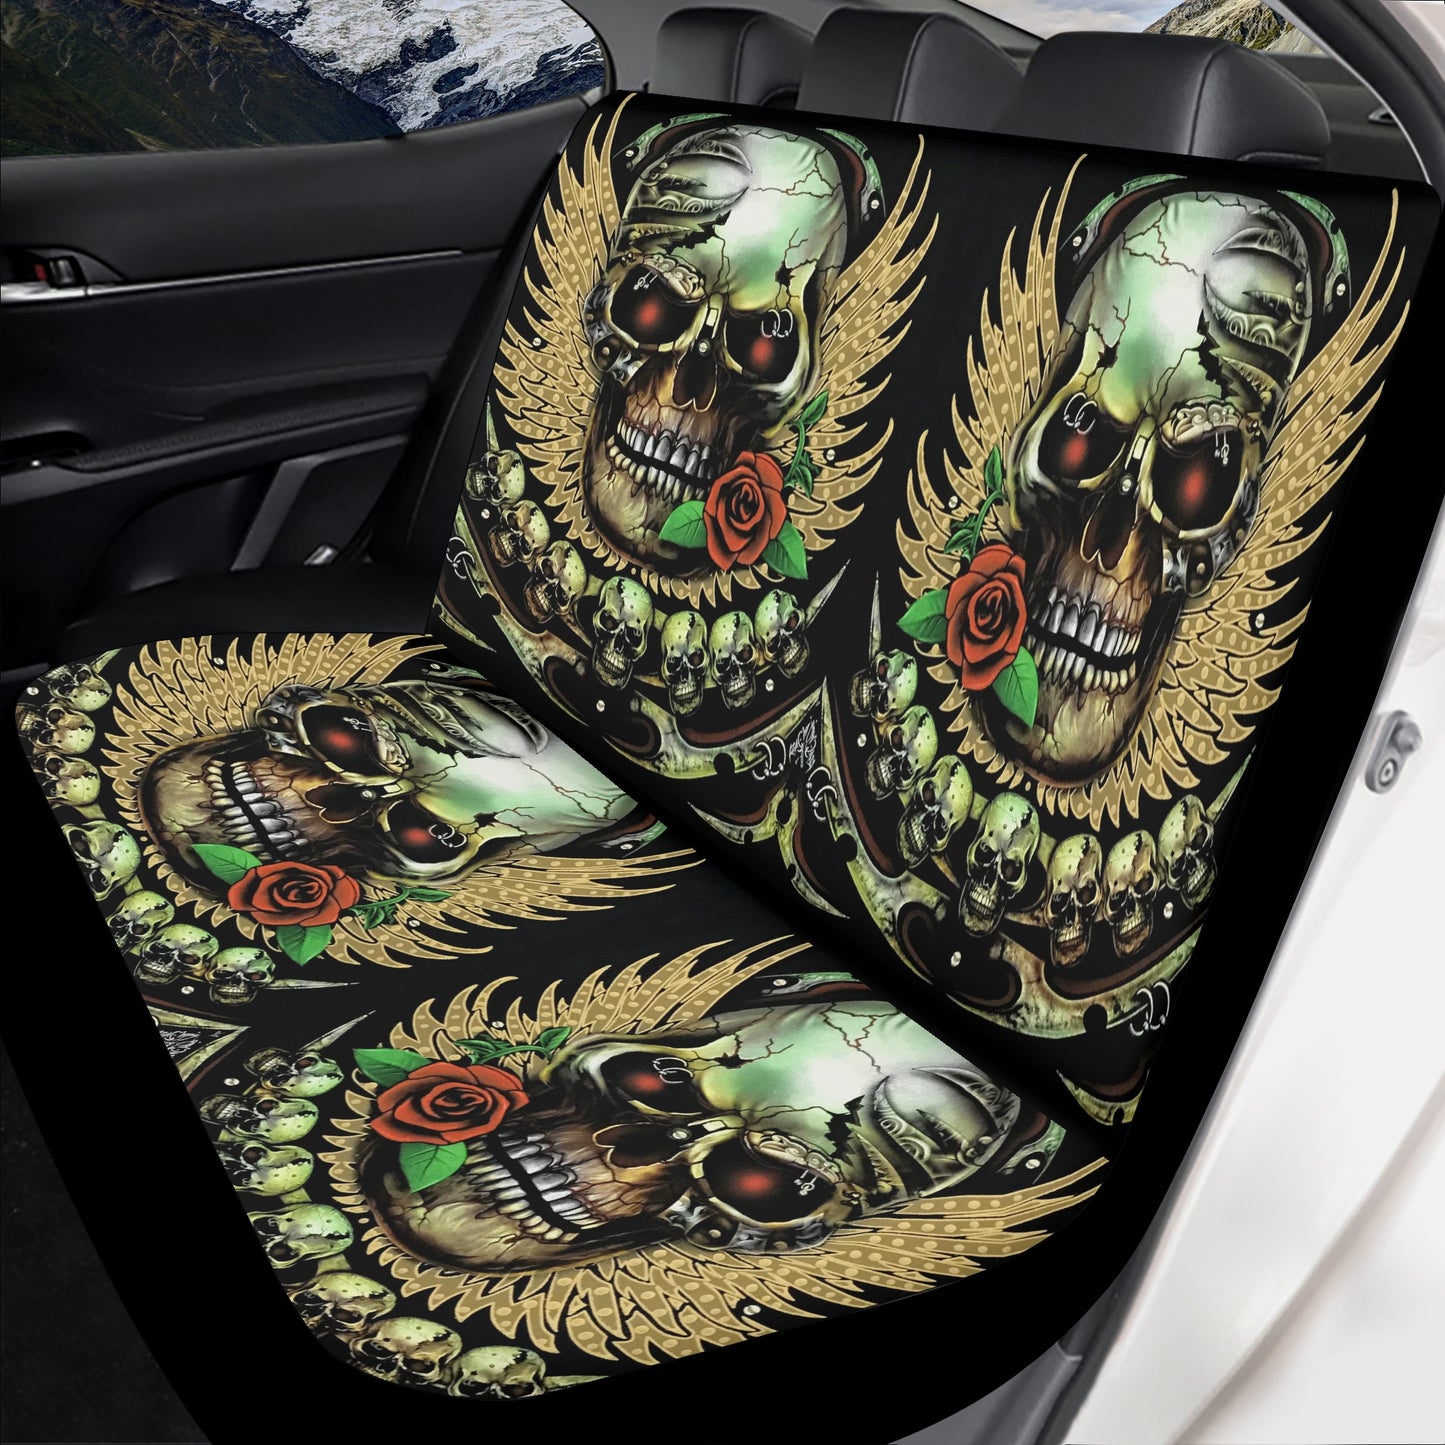 Candy skull seat cover for car, sugar skull girl car seat tool, floral skull seat cover protector, sugar skull car seat tool, day of the dea